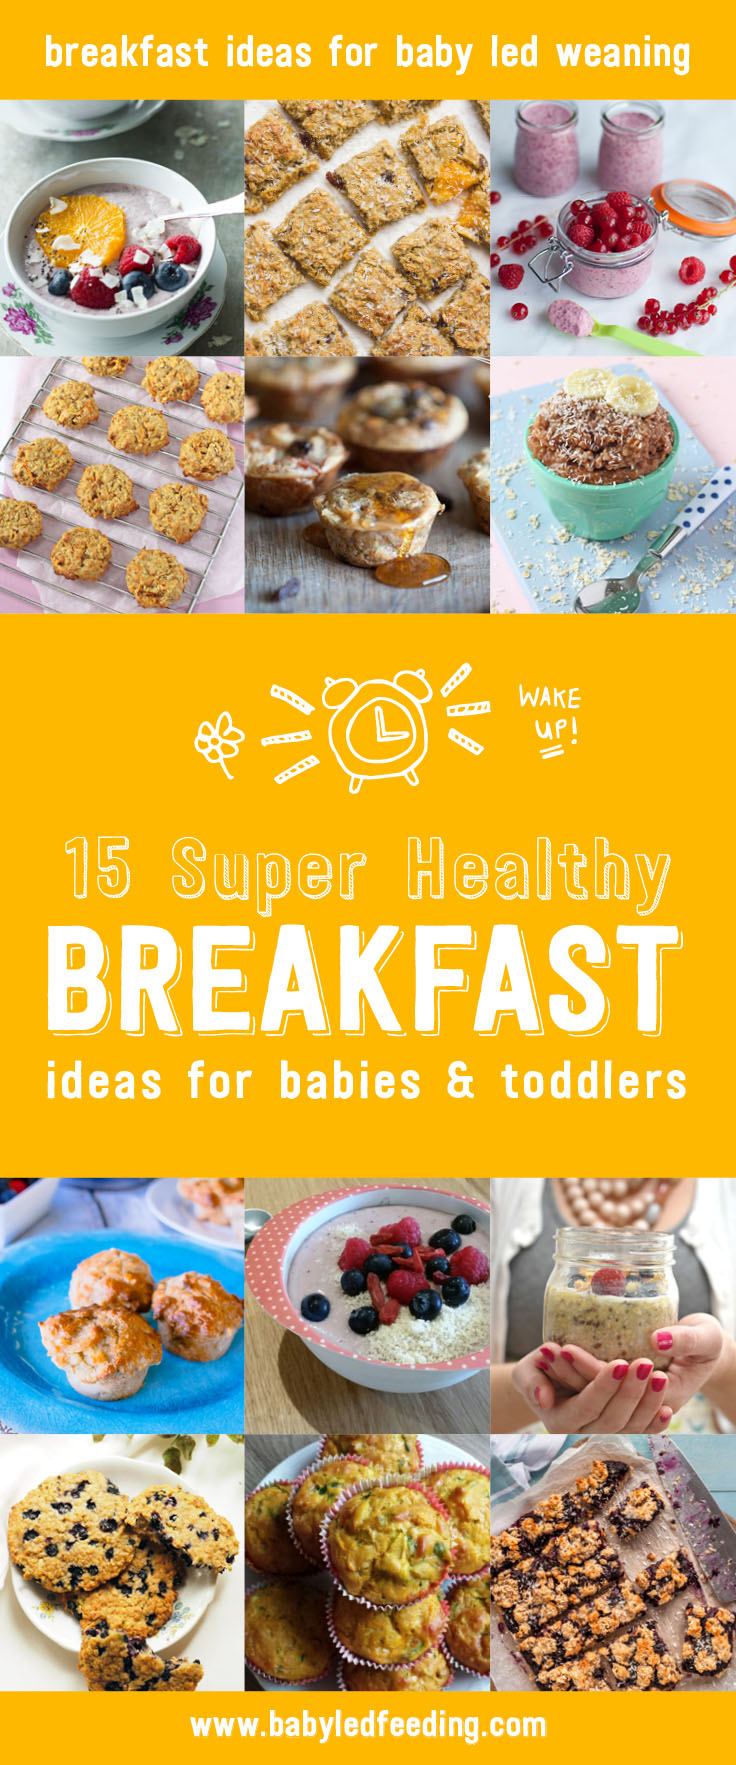 15 super healthy breakfast ideas for baby led weaning and toddlers. Most are refined sugar free and low salt. These easy breakfast recipe can be make ahead or last minute. Nutritious breakfast cookies, freezer friendly muffins and veggie loaded pancakes, fast and easy oatmeal ideas, make ahead breakfast pudding, and much more! All nutritious and all delicious! #breakfastrecipe #babyledweaning #pickyeater #breakfast #healthybreakfast #healthyrecipe